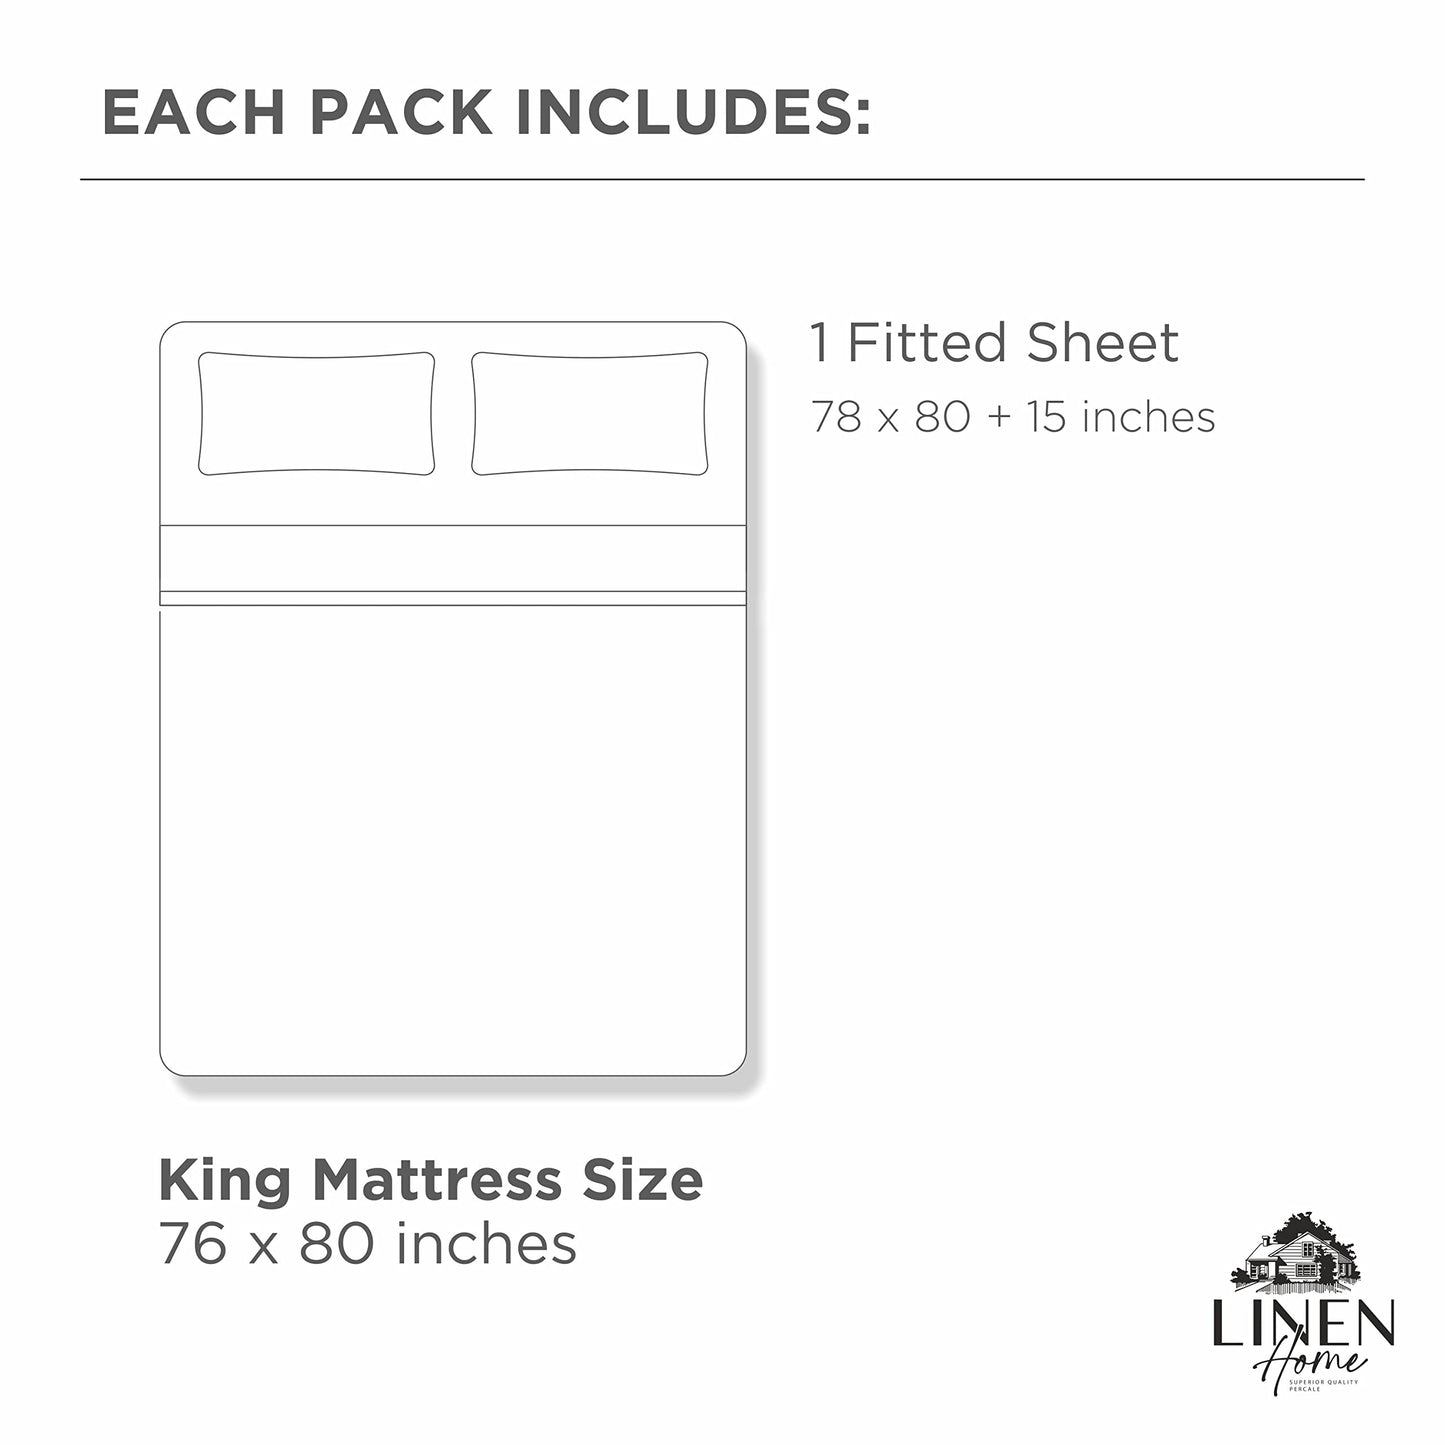 100% Cotton Percale Fitted Sheet King Size, Charcoal, 1 Deep Pocket Fitted Sheet, Crisp and Cool Strong Bed Linen, 78"X80"+15"